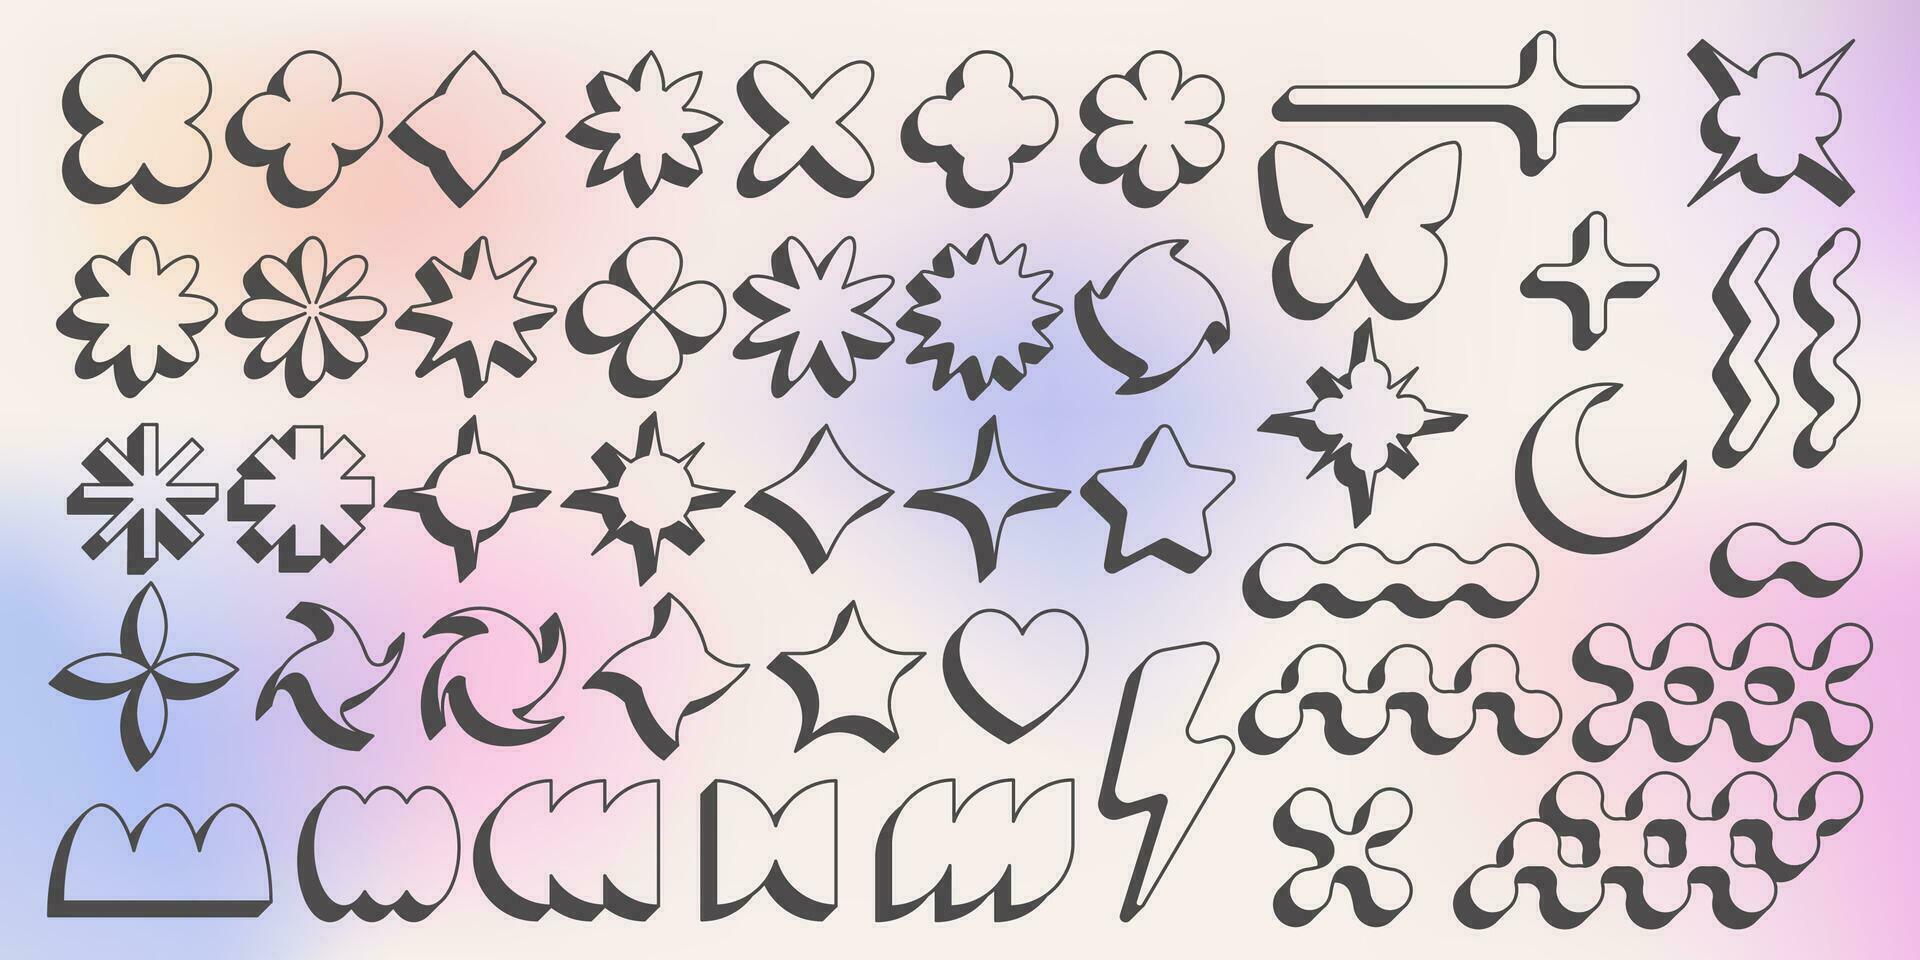 Abstract geometric elements for design. Neobrutalism graphic shapes. Minimal groovy Y2k retro stickers. Set of retro labels. Simple vector flowers, butterfly and stars.